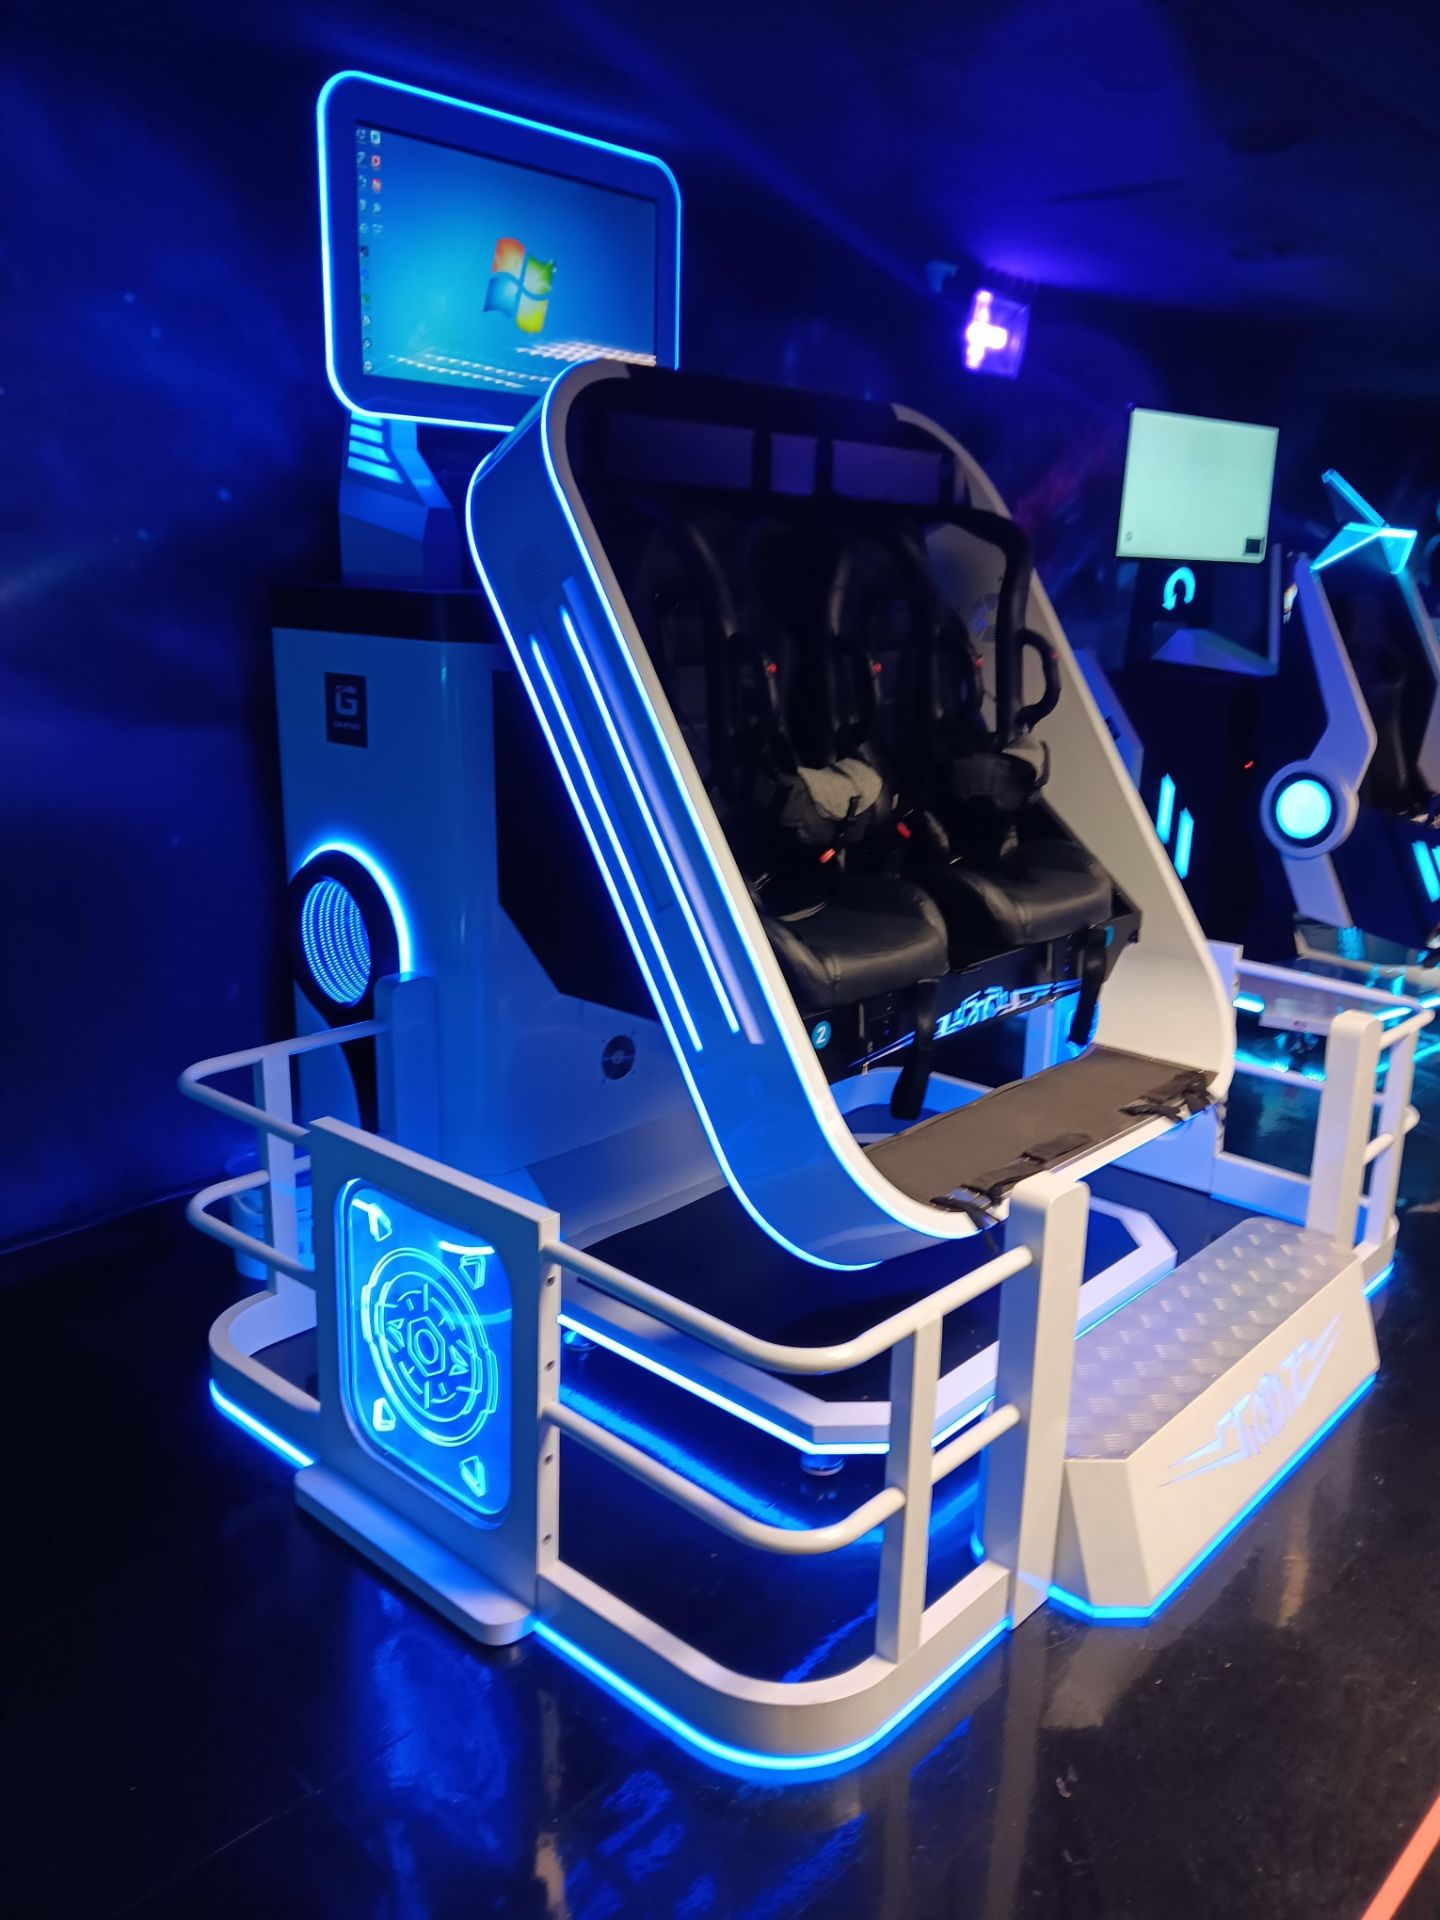 Movie Power 360 Degree 2-Person Twin Seat VR Roller Coaster Simulator – Cost New £30,000 – Buyer